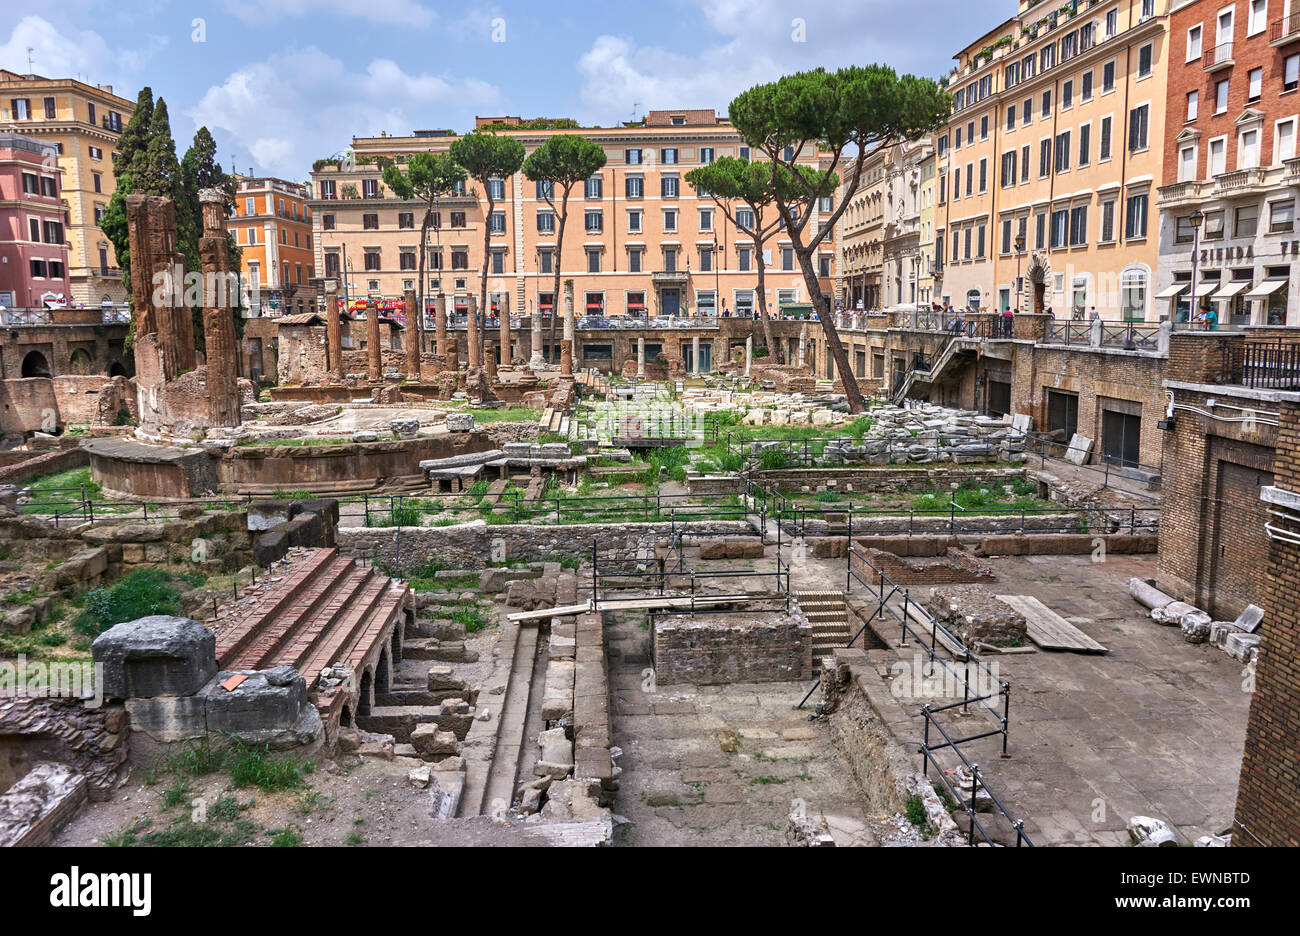 Largo di Torre Argentina a square in Rome, Italy, that hosts four Republican Roman temples, and the remains of Pompey's Theatre Stock Photo